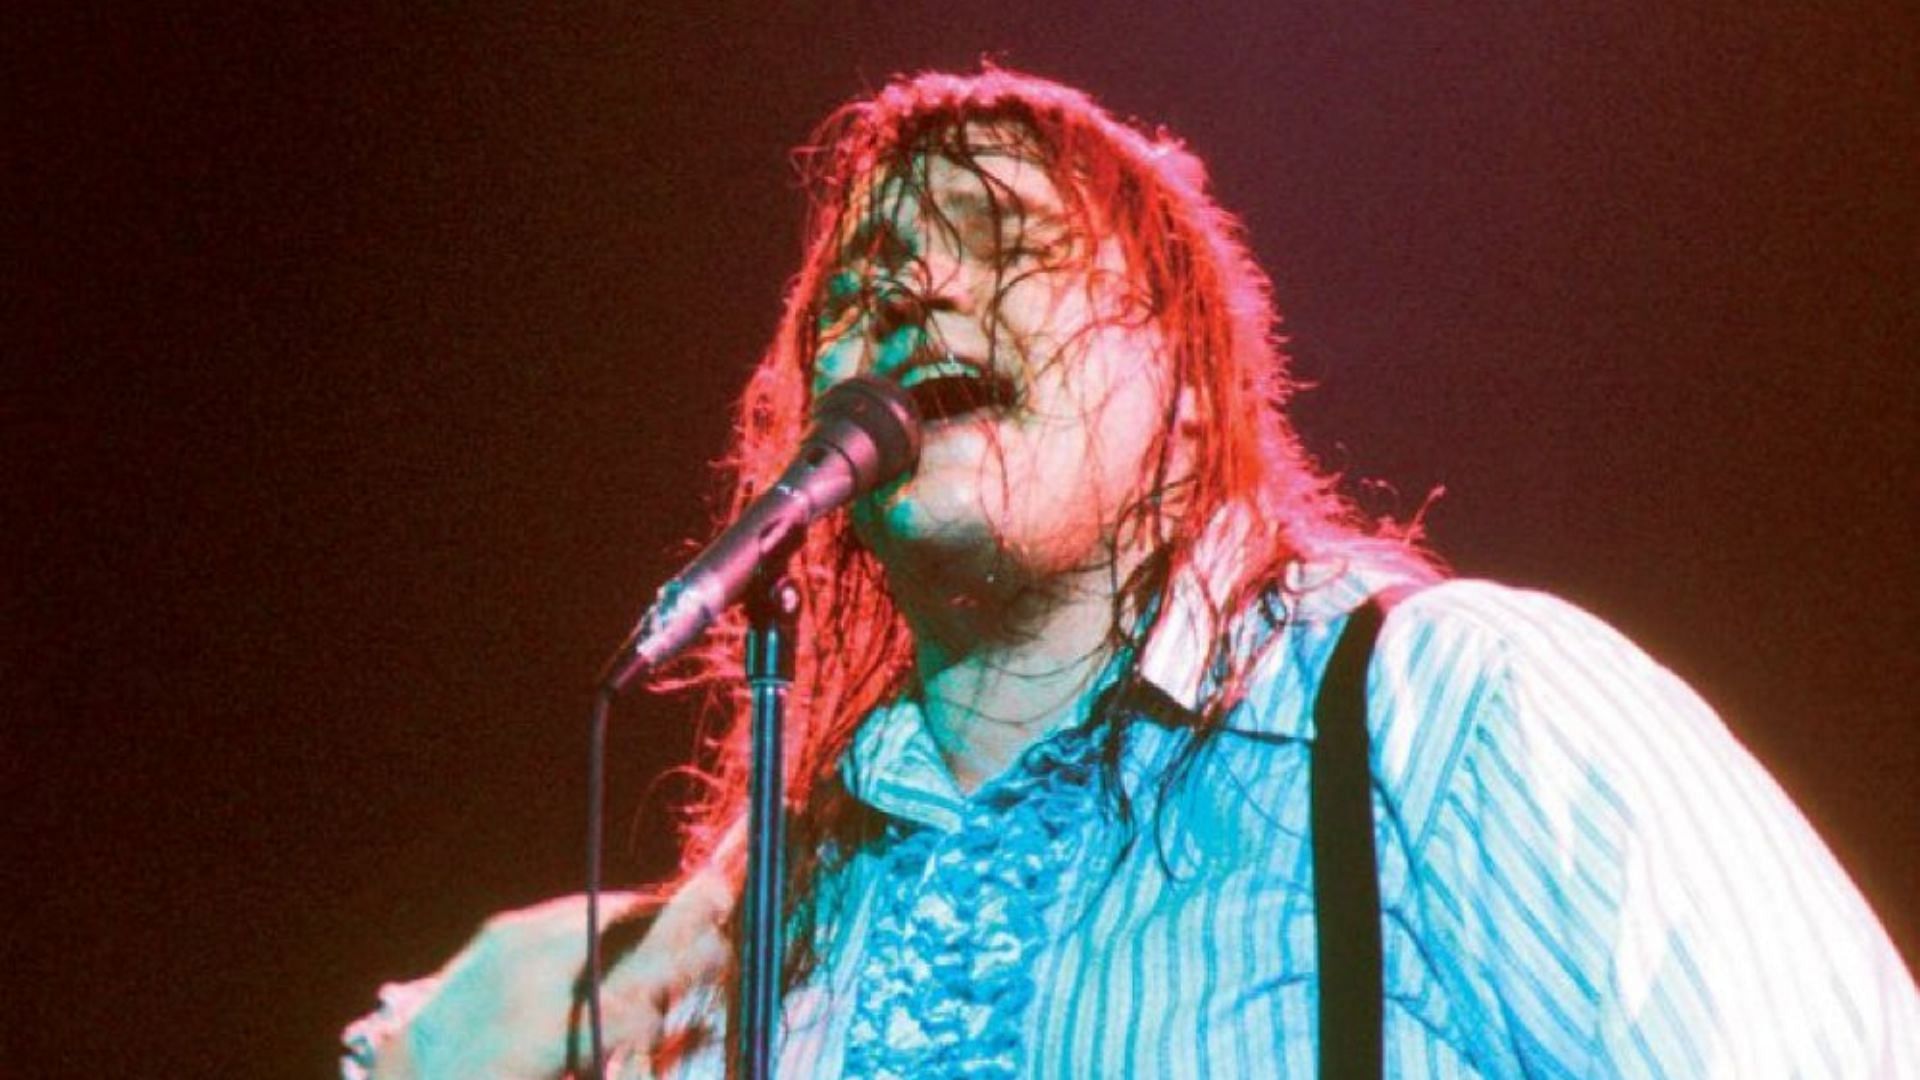 Michael &quot;Meat Loaf&quot; Lee Aday - 1947-2022